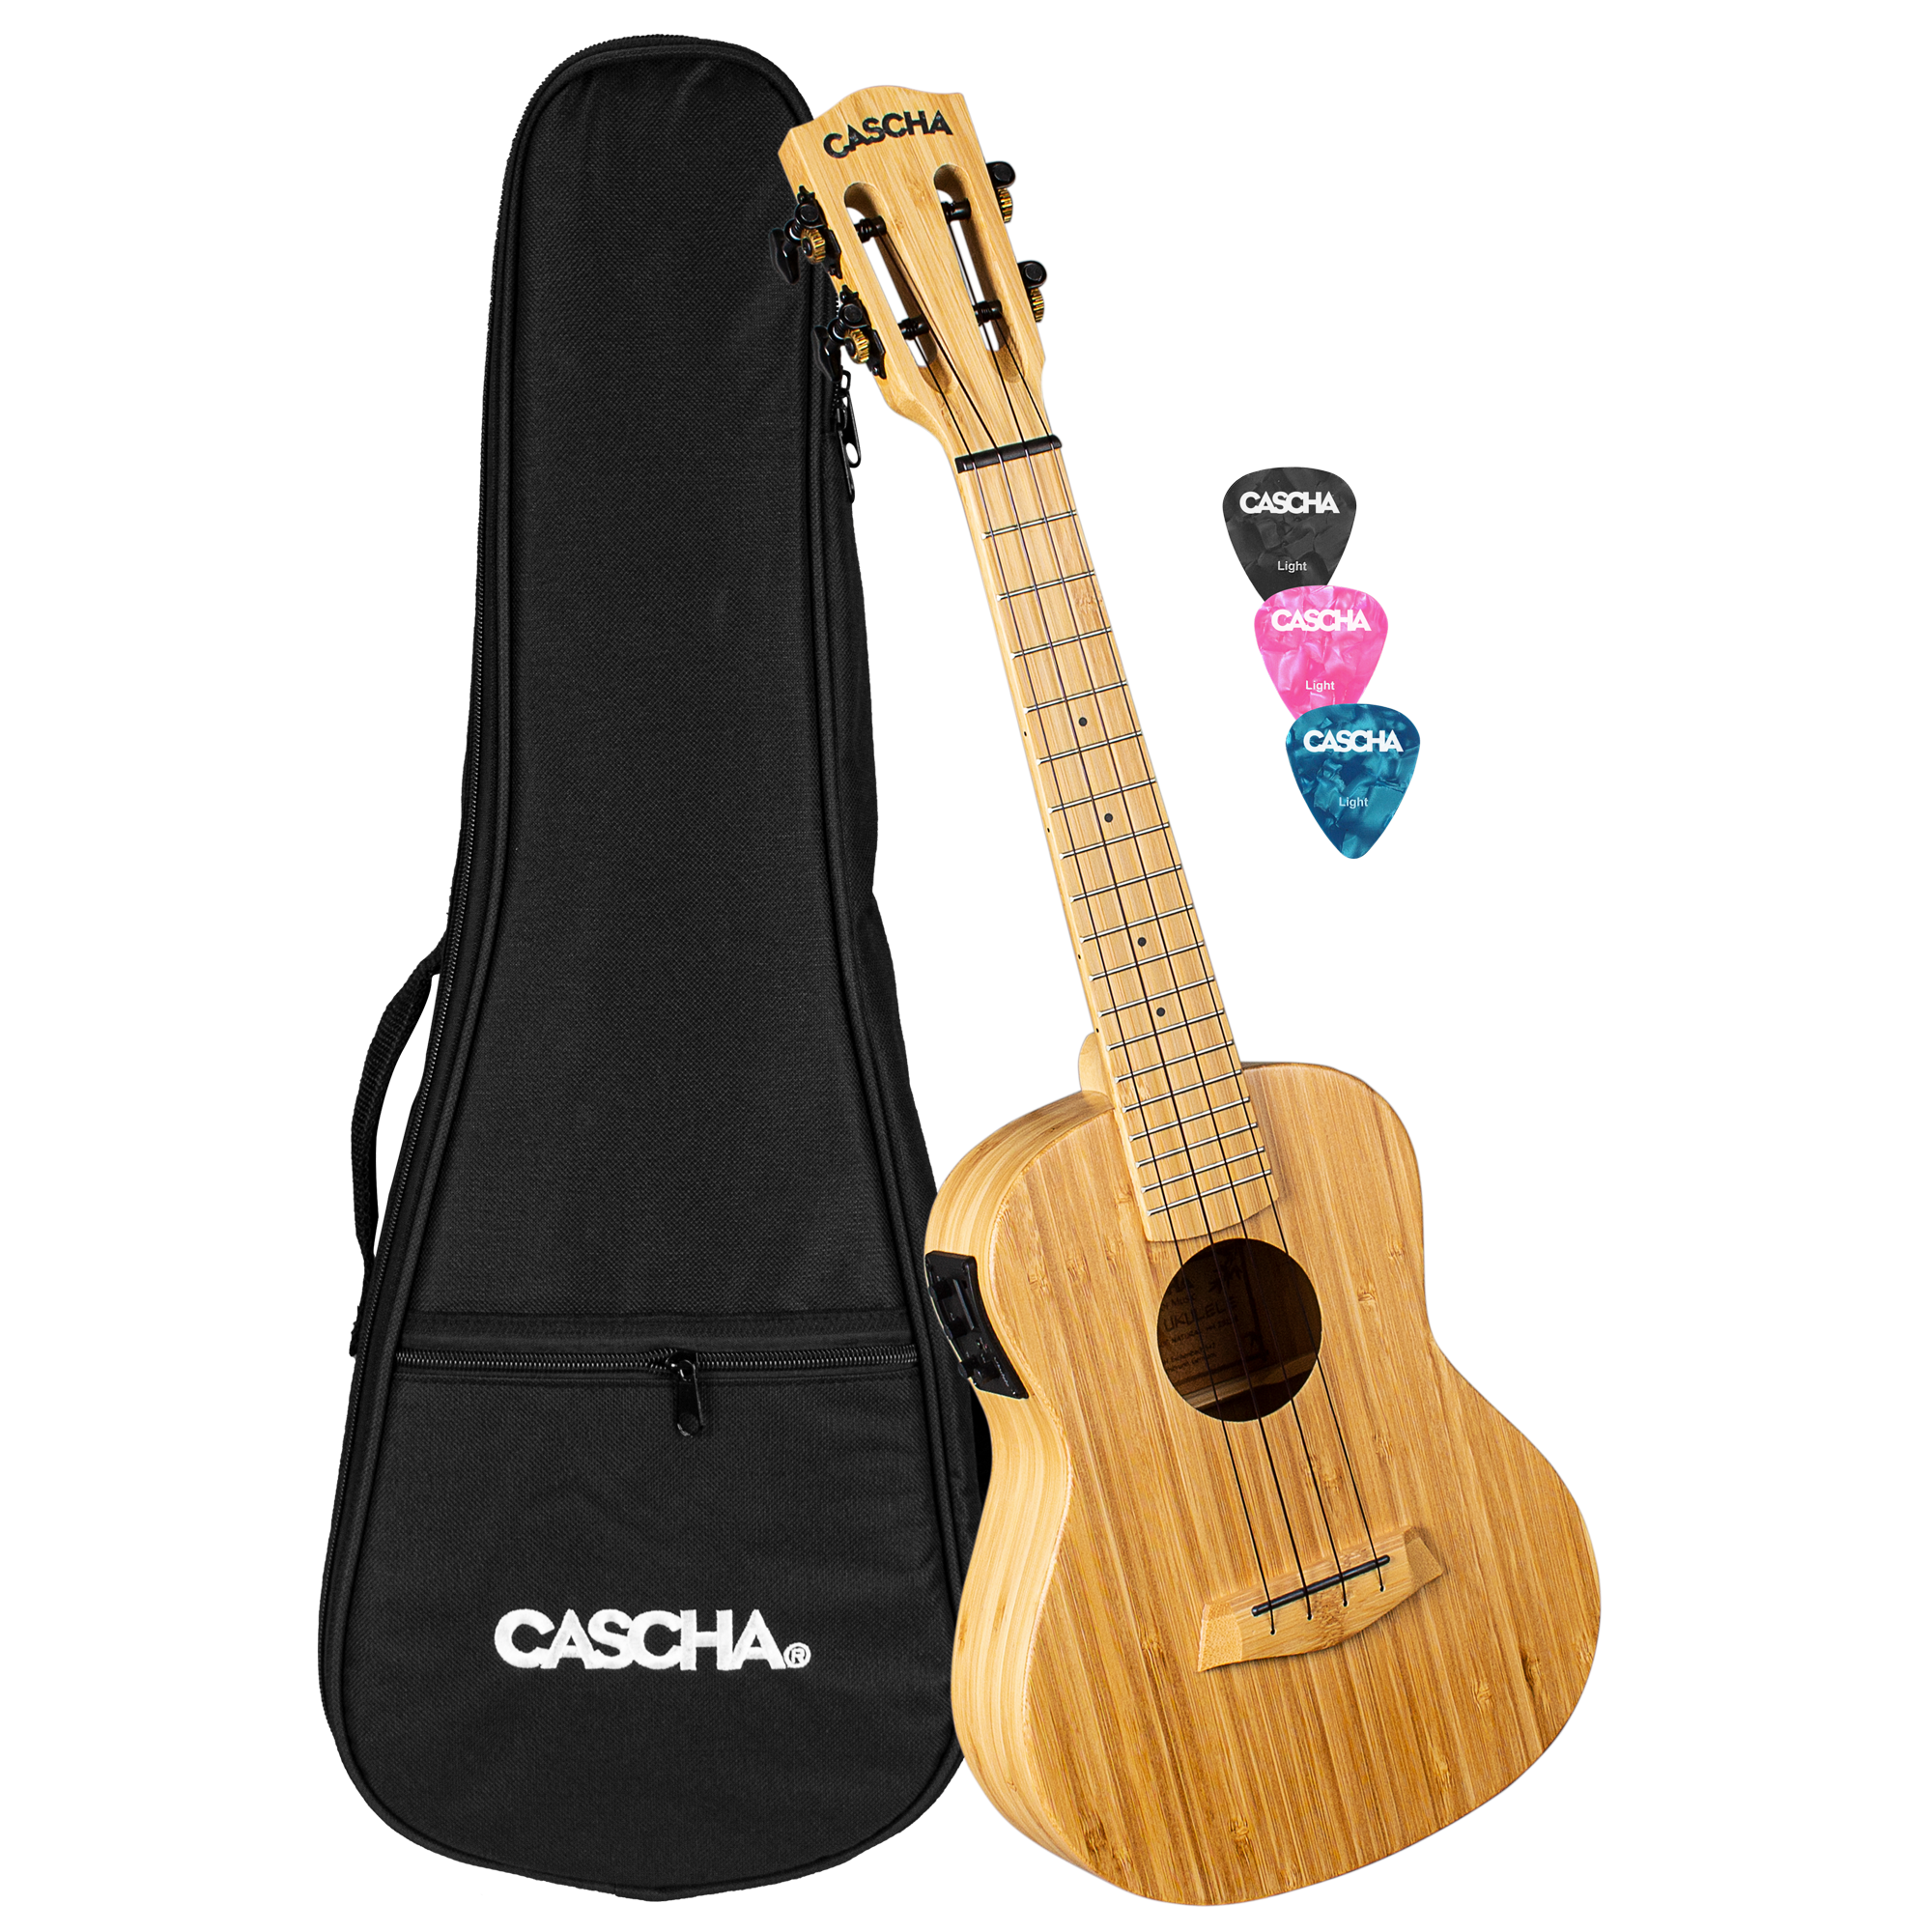 Concert Ukulele Bamboo Natural with pickup sy